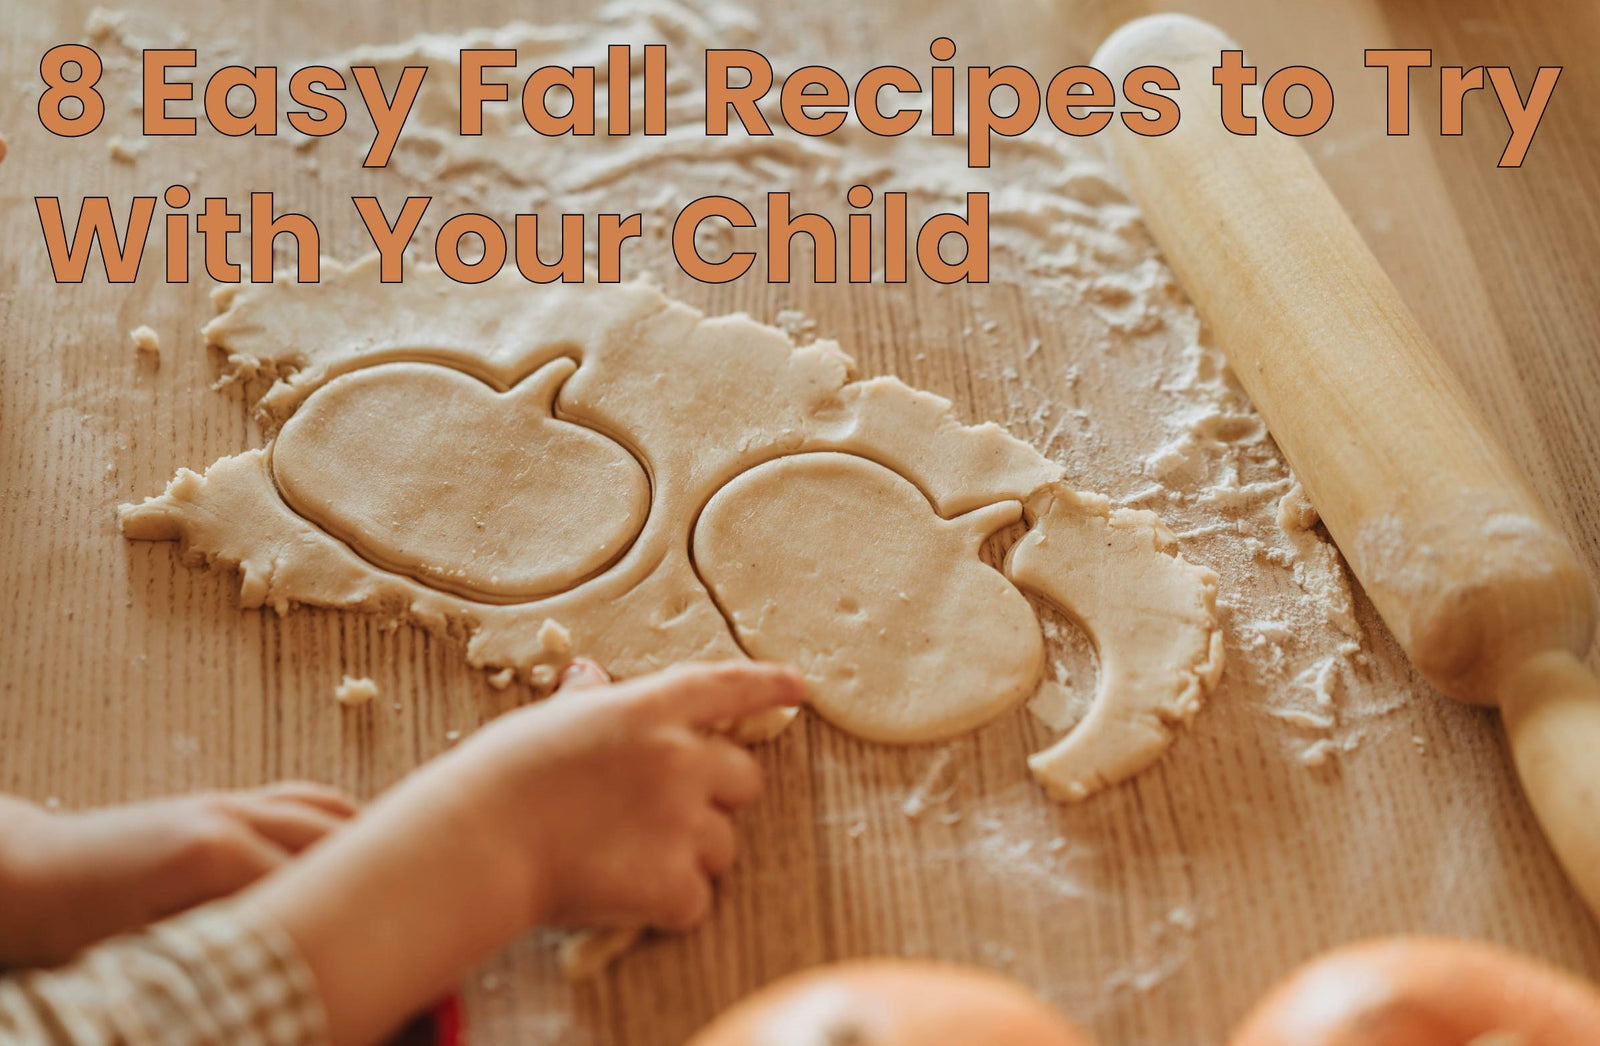 easy fall recipes for kids Fall recipes to do with children